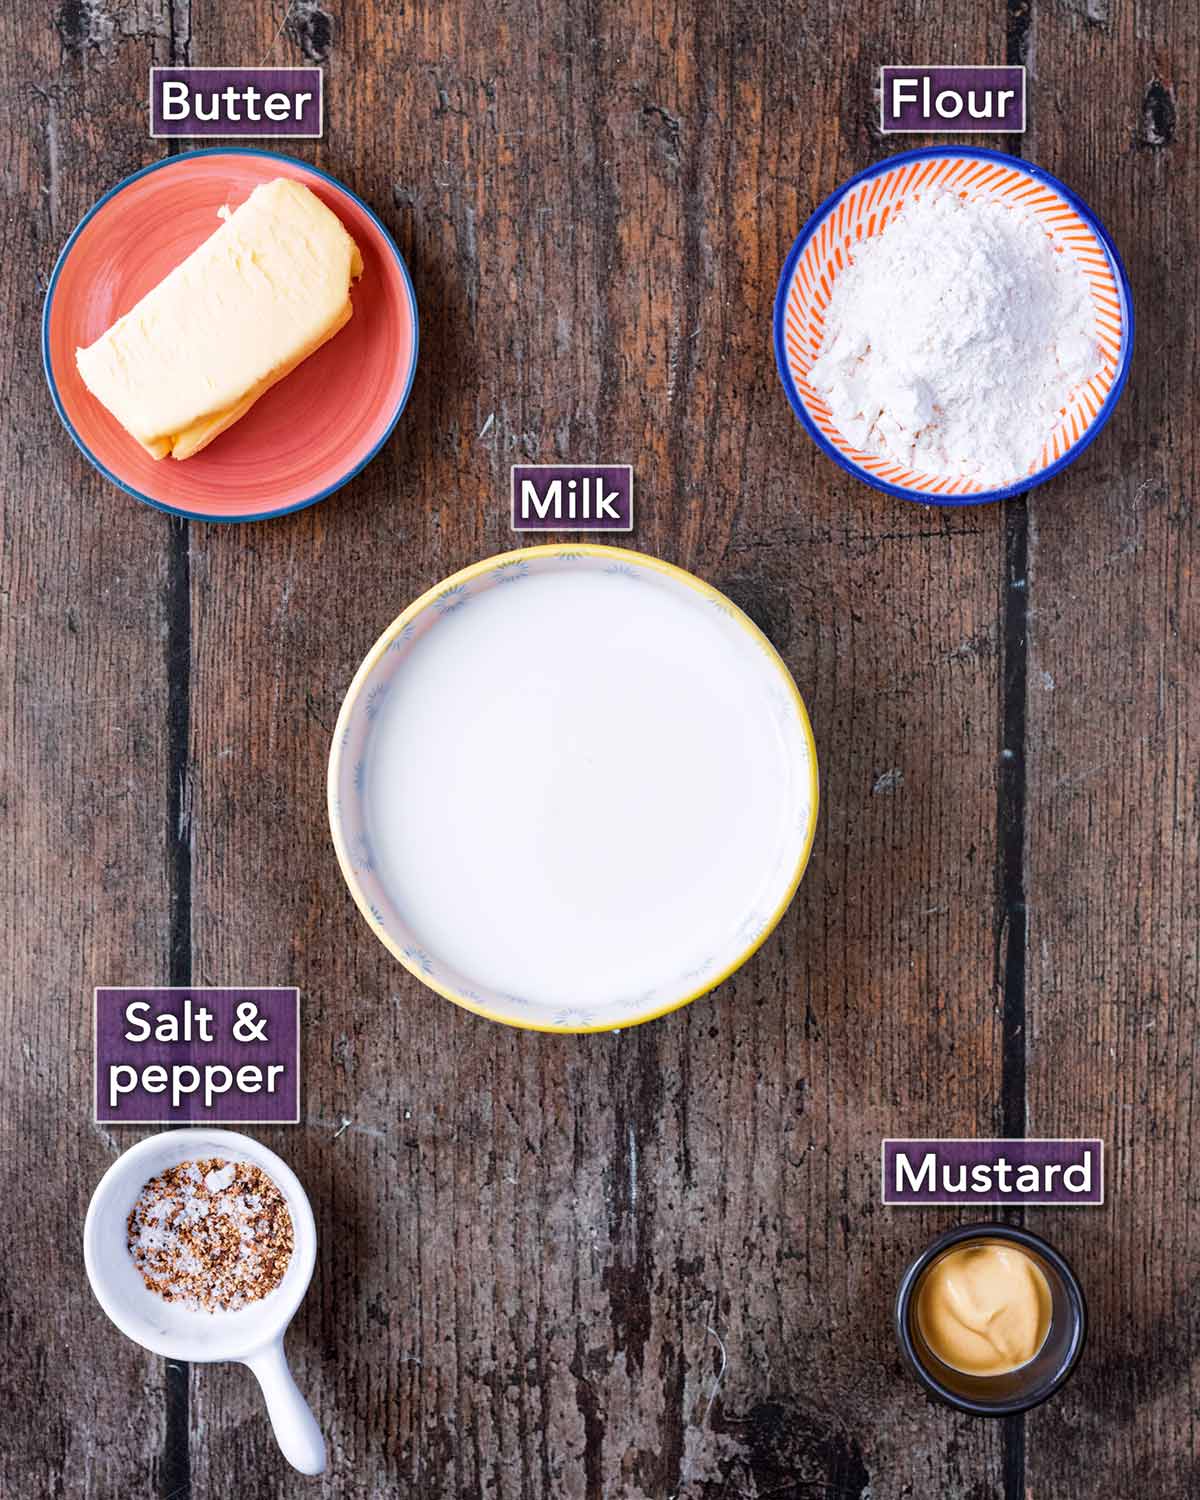 Five ingredients used to make bechamel sauce, each with a text overlay label.